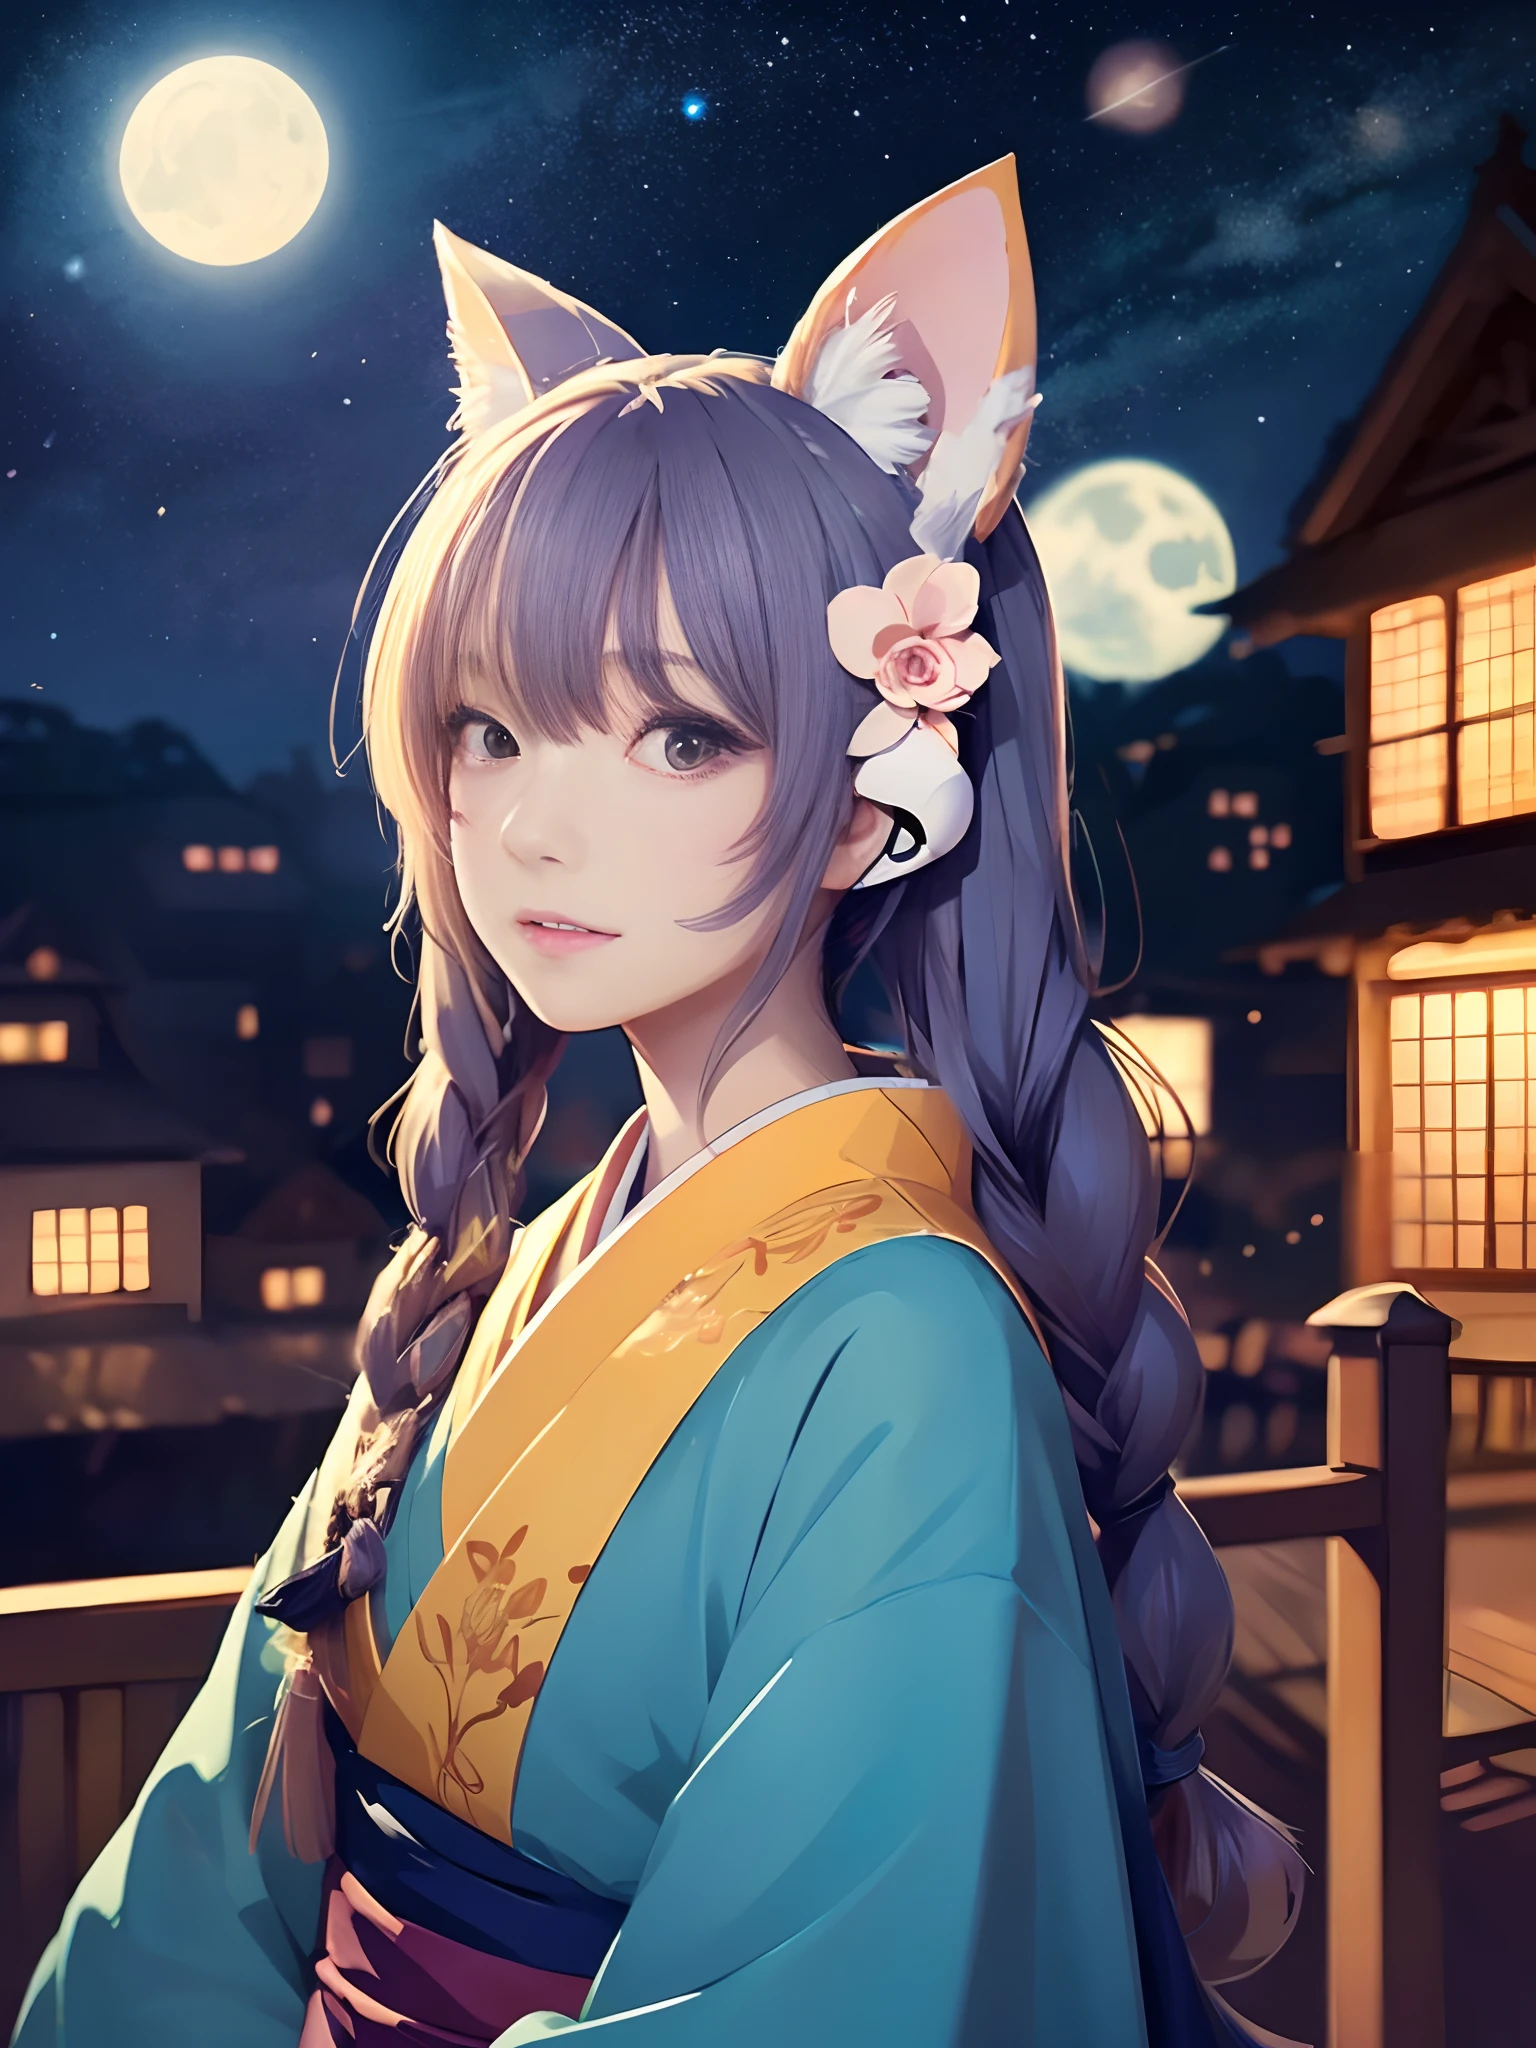 Anime cat-eared girl in a cat-eared kimono suit, Watching the shoulder, Anime drawing by Yang J, Pixiv Contest Winner, serial art, digital anime illustration, Kawashi, anime style illustration, Anime Style 4k, Beautiful Anime Portrait, anime style portrait, anime style artwork, Guweiz style artwork, Anime Illustration, digital anime art, Detailed Digital Anime Art, Beautiful starry sky, ((Beautiful night view))